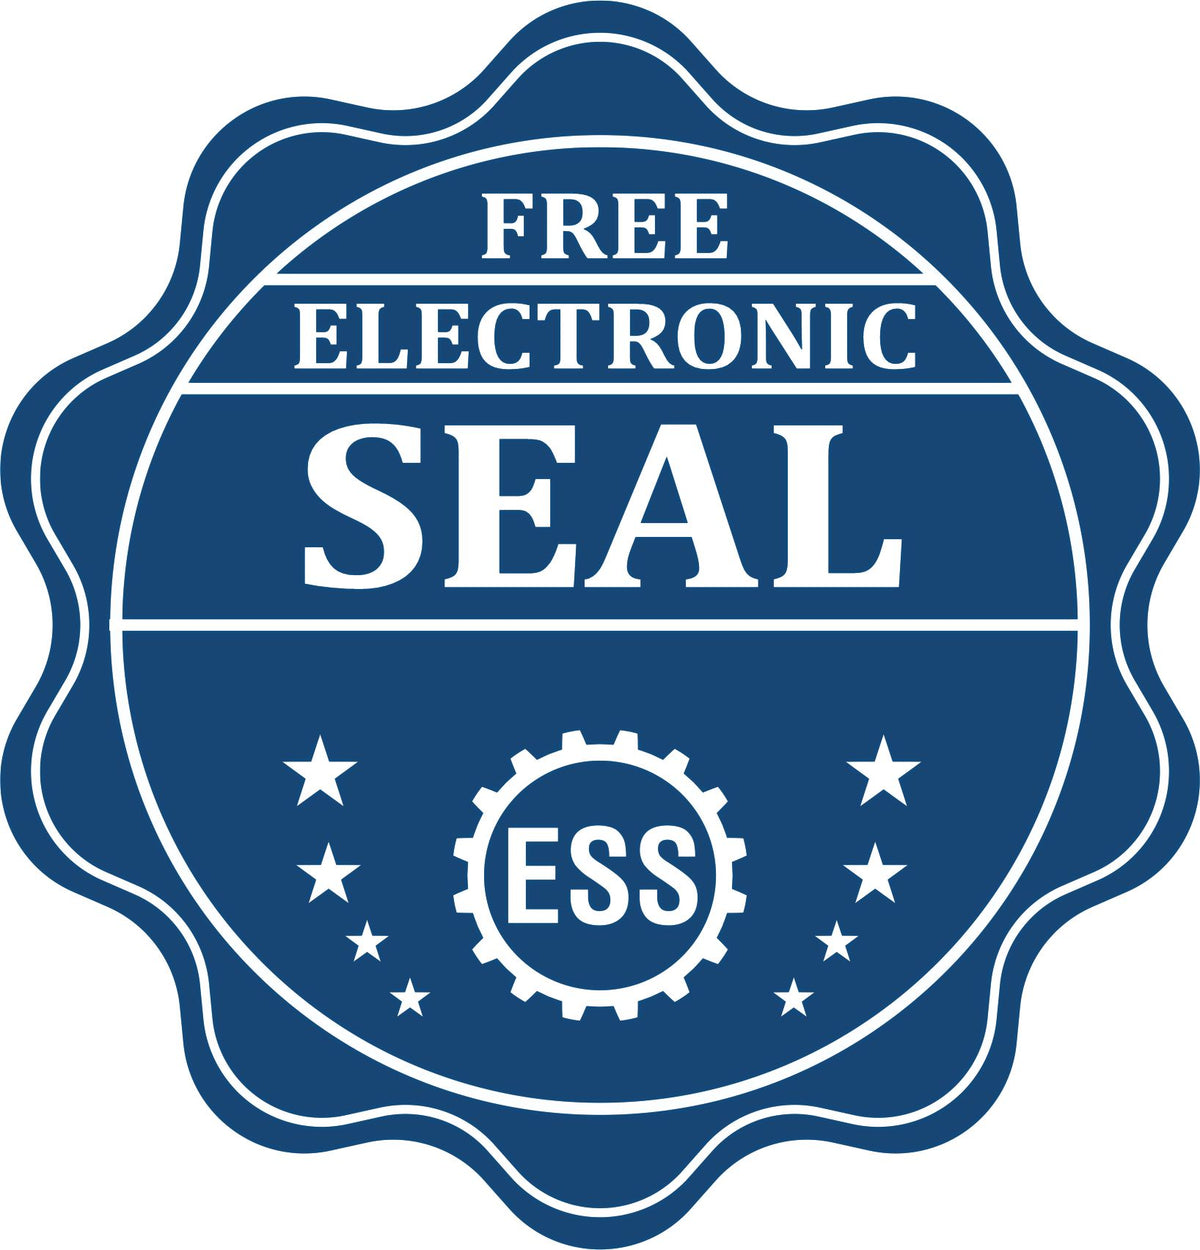 A badge showing a free electronic seal for the Hybrid Kansas Engineer Seal with stars and the ESS gear on the emblem.